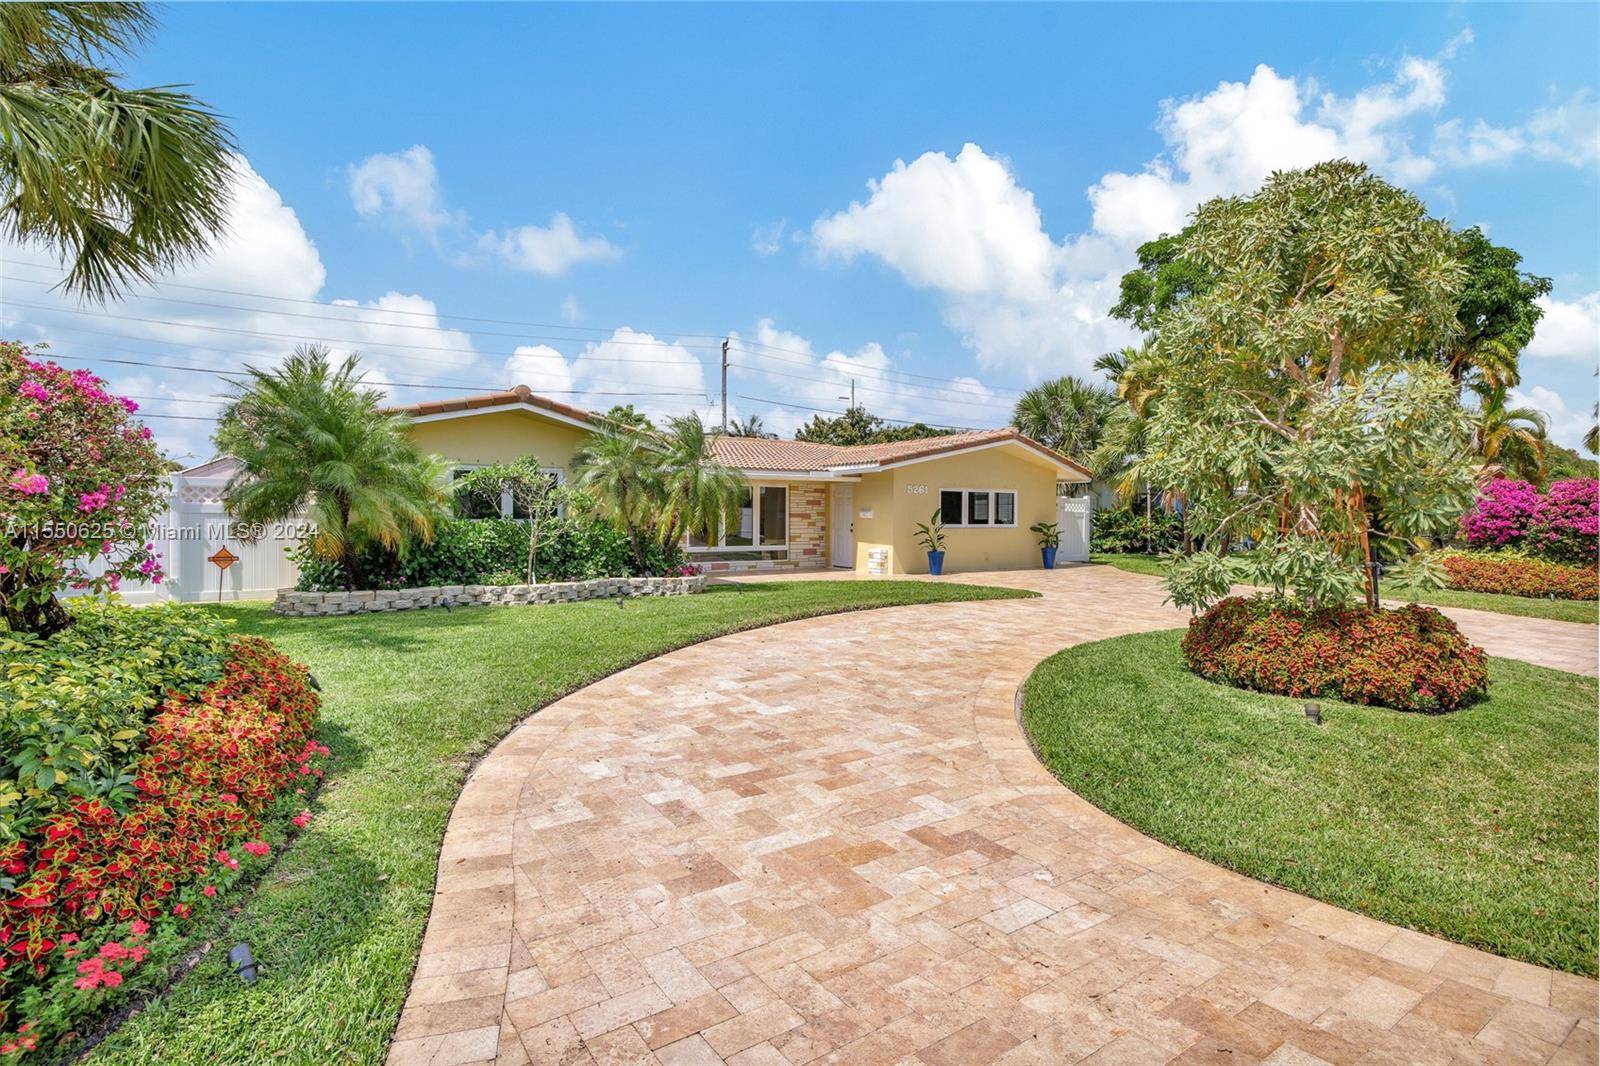 Beautiful poolside home tucked away in ideal Knoll Ridge community.